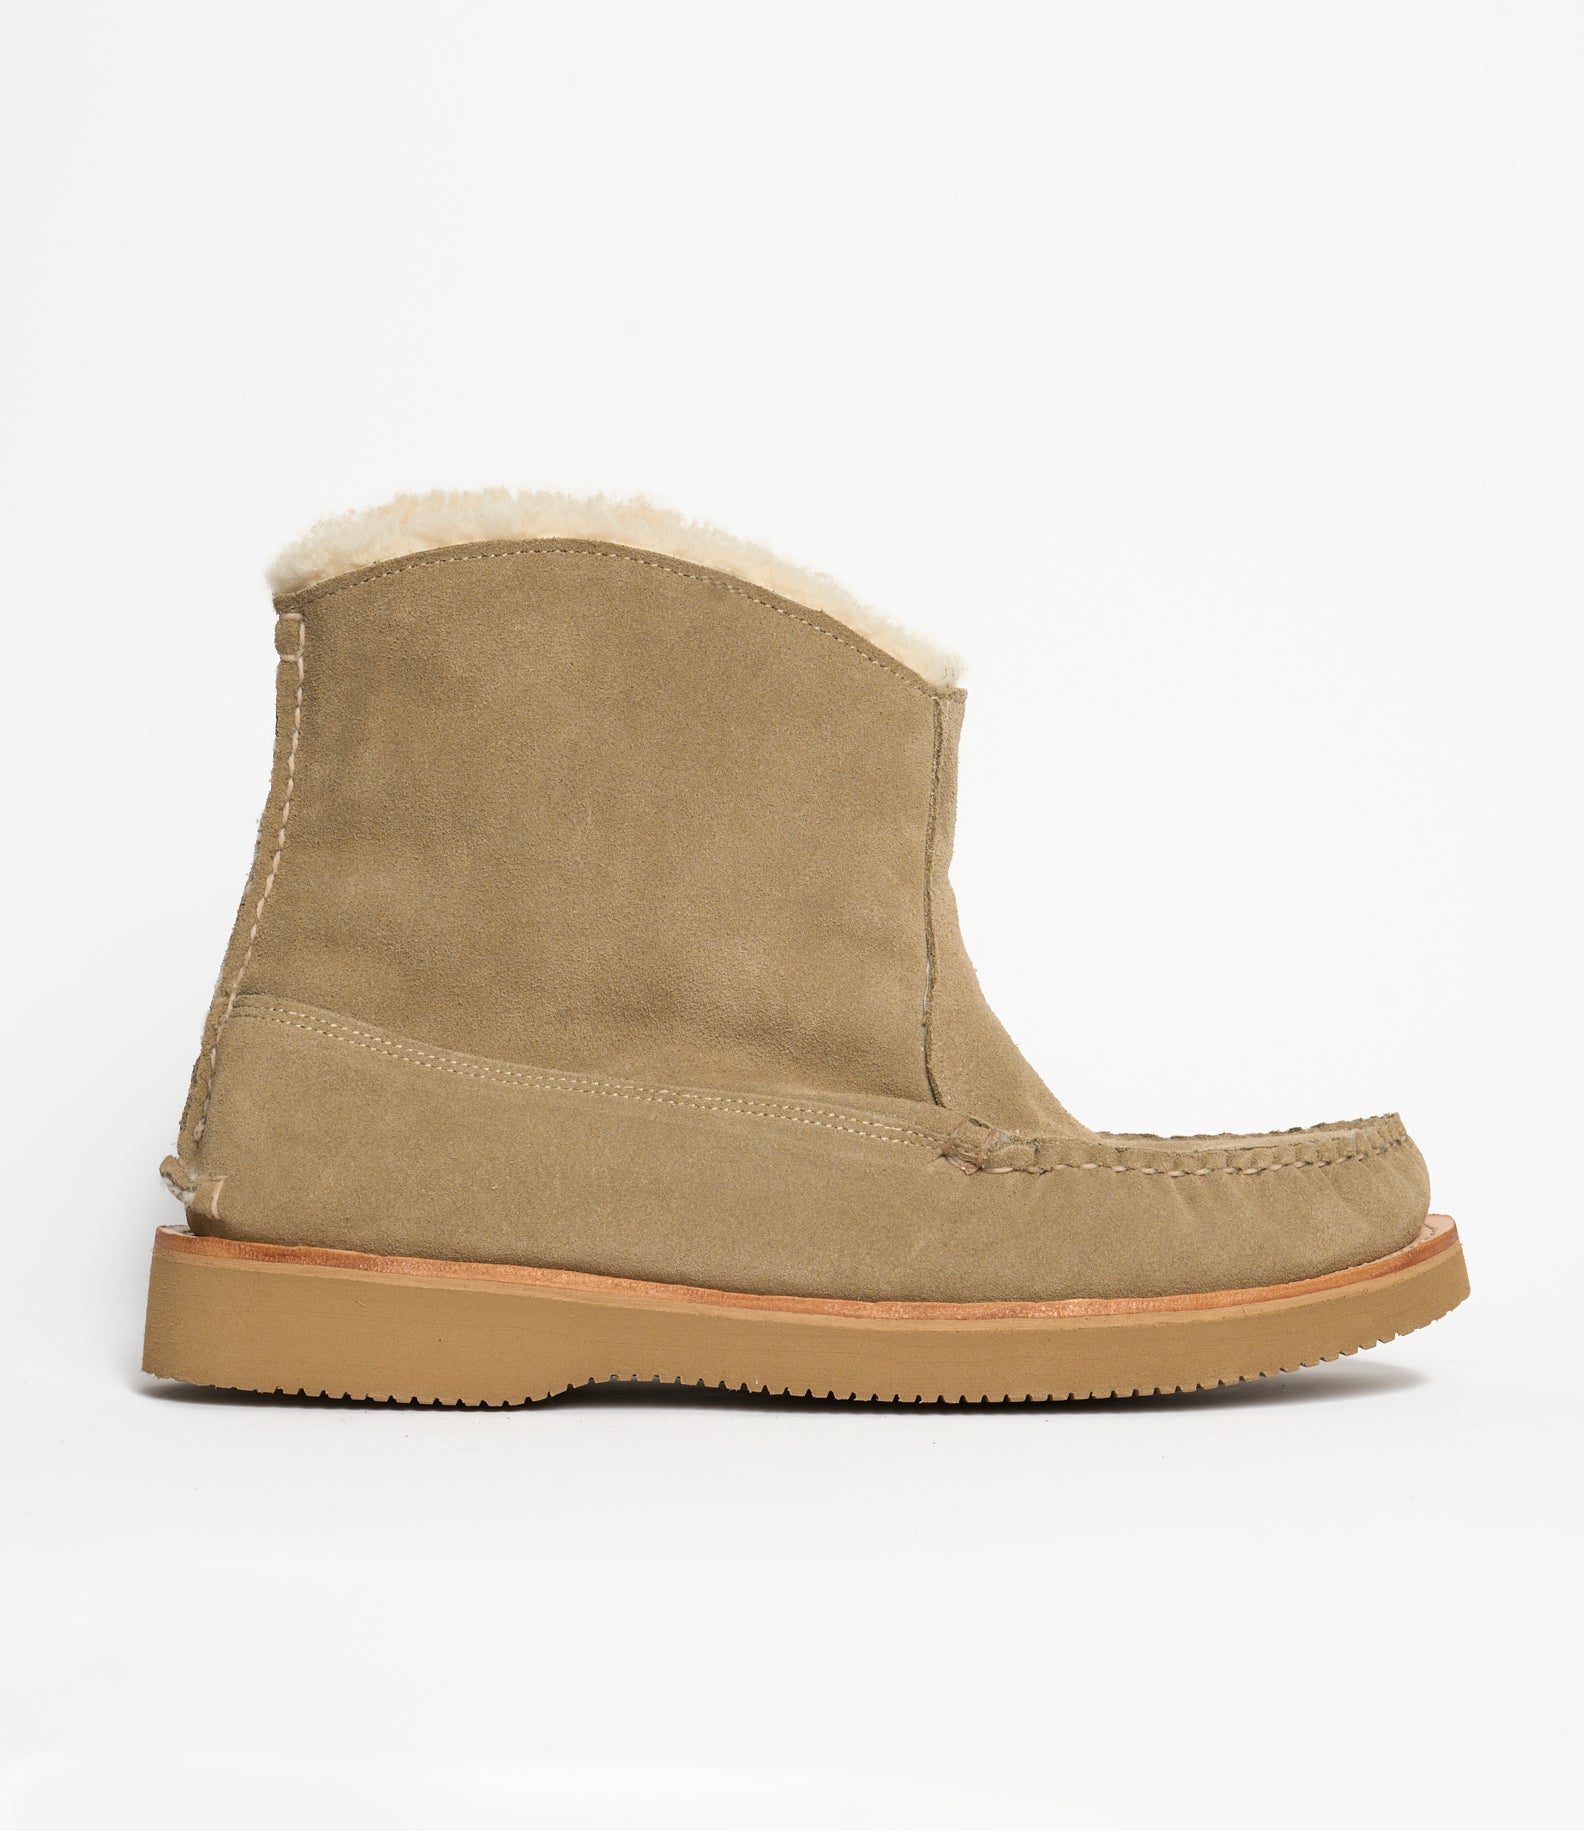 Engineered Garments x Easymoc - Surf Boot - Stone Suede